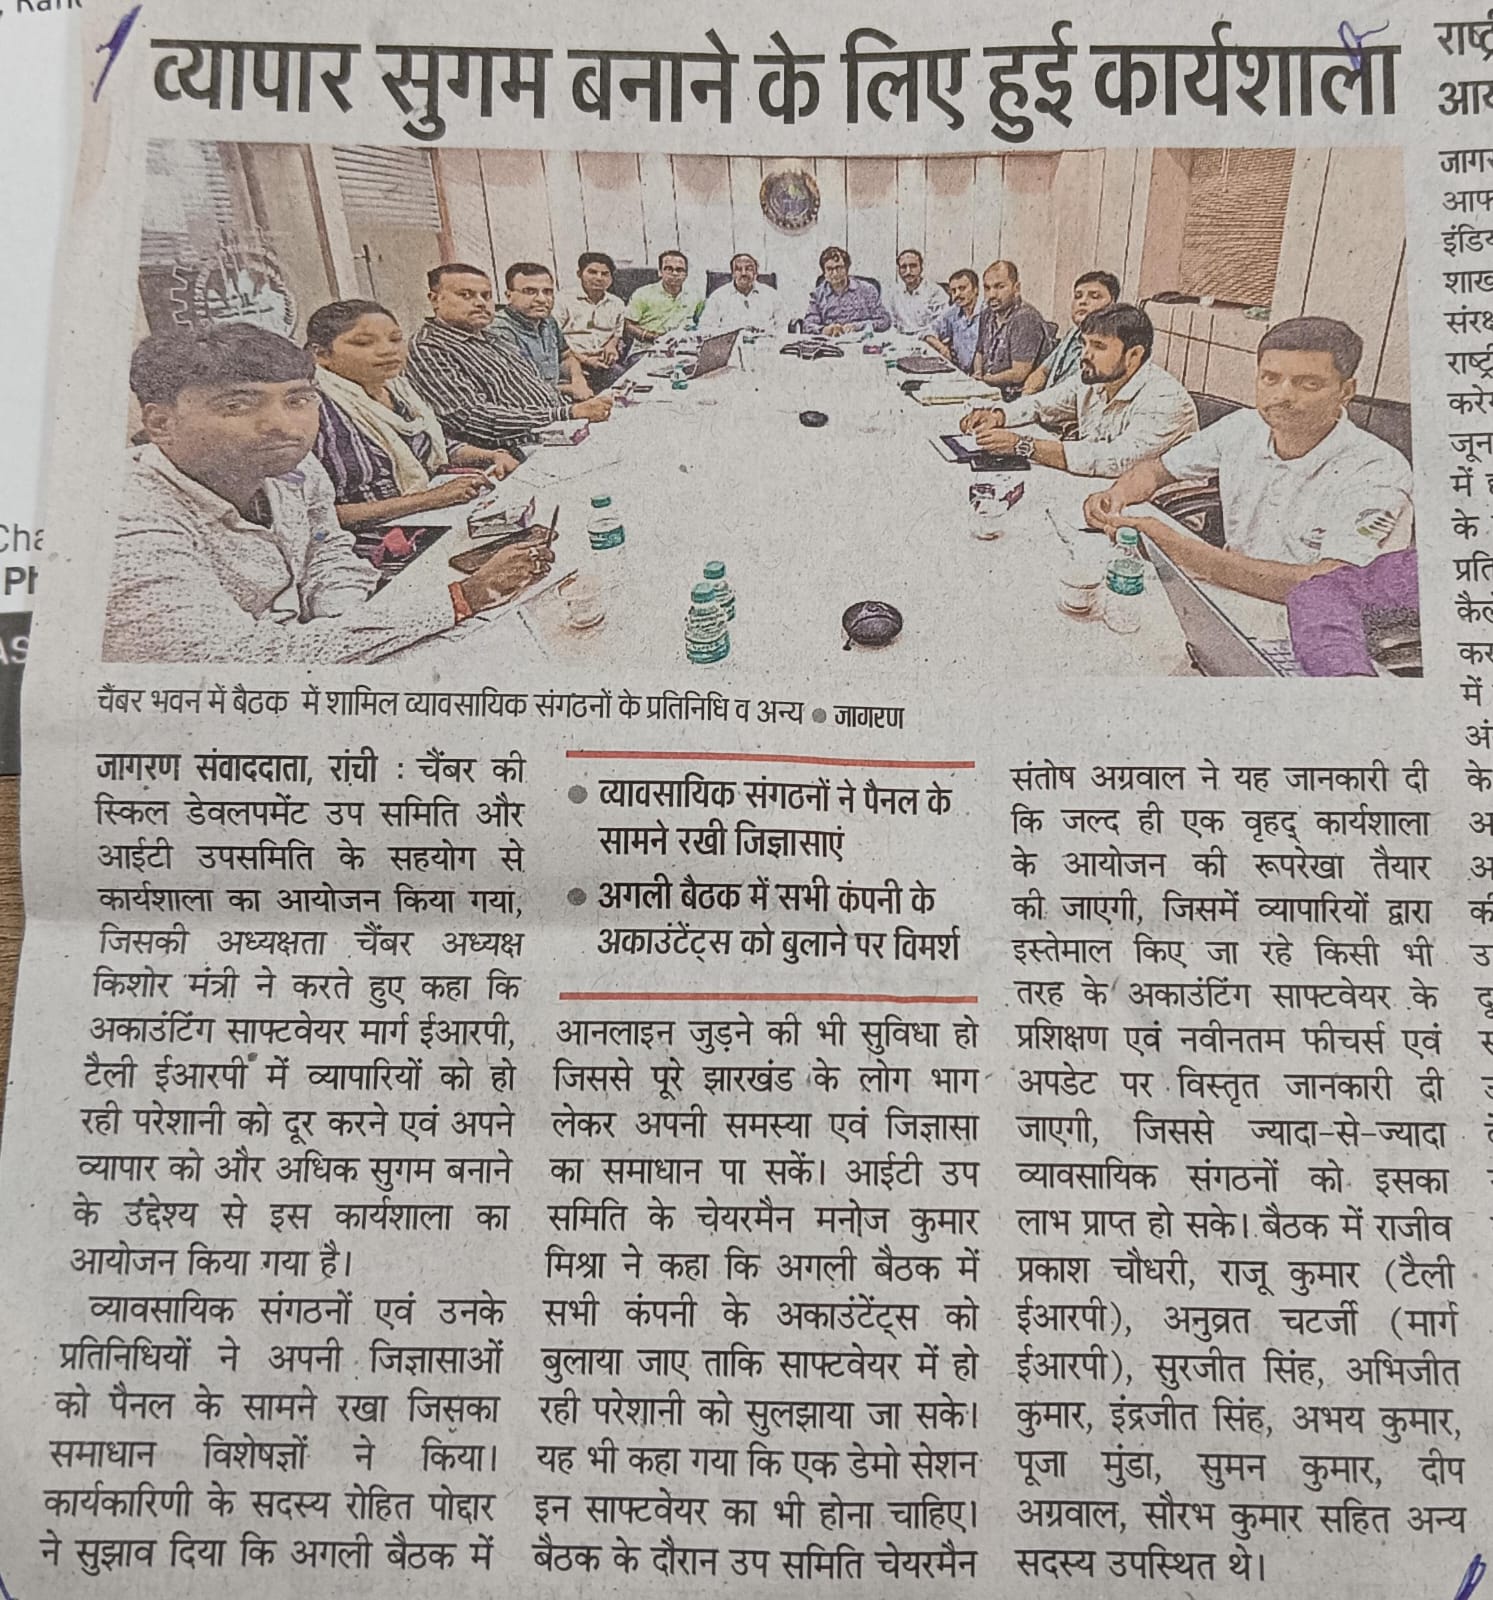 Skill Develoment Sub-Committee of FJCCI organized workshop at Chamber Bhawan